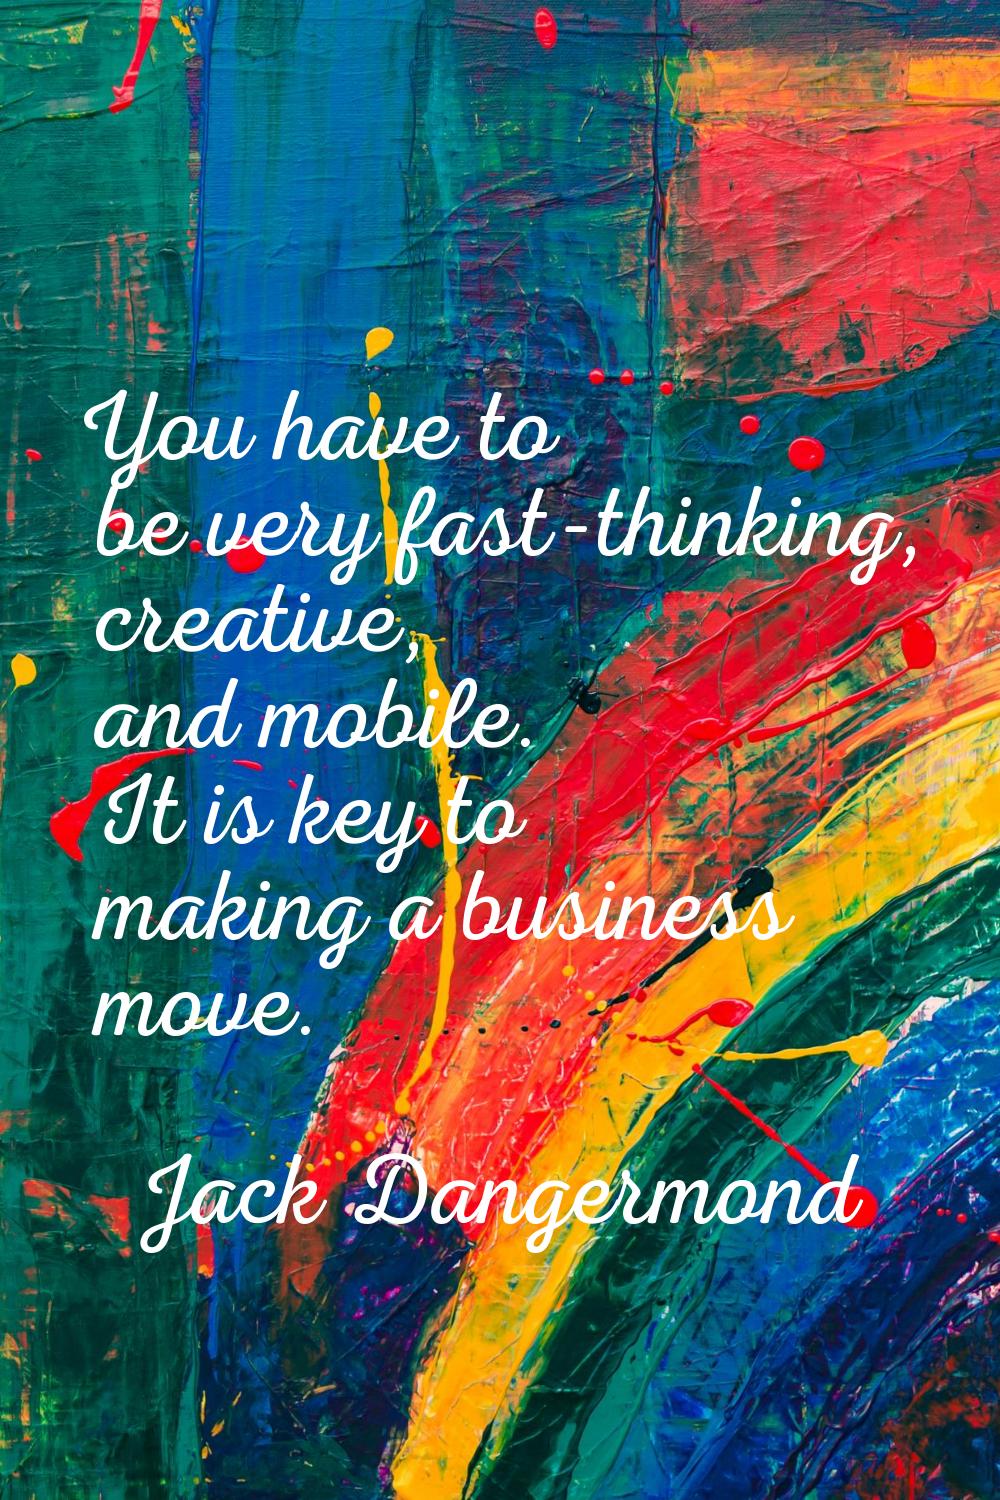 You have to be very fast-thinking, creative, and mobile. It is key to making a business move.